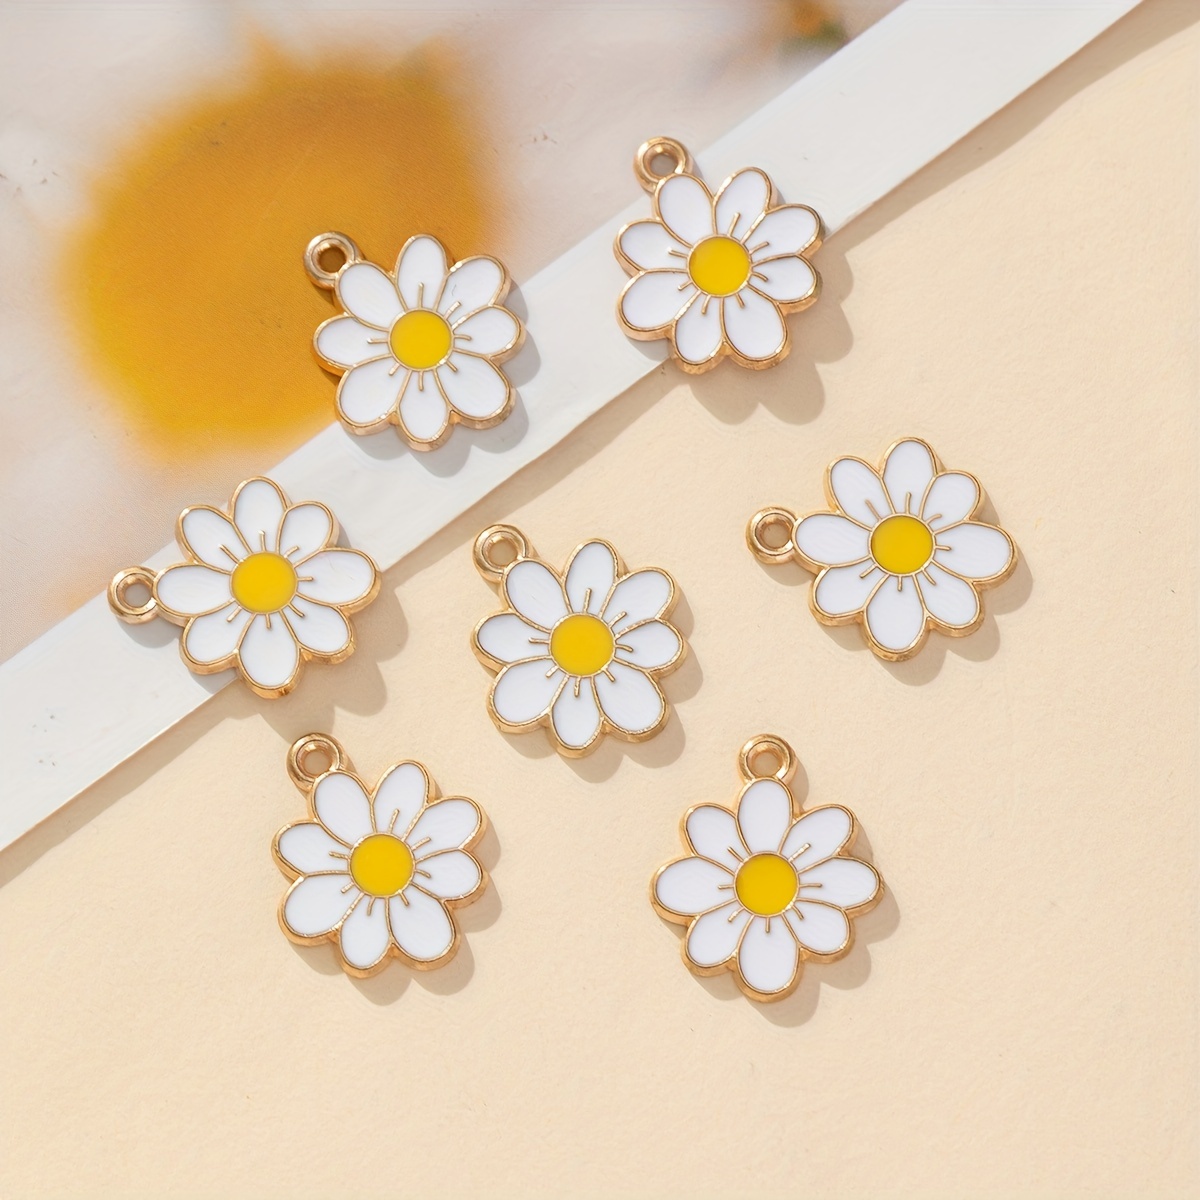 10pcs 12*9MM Enamel Daisy Flower Charms for Necklaces Pendants Earrings DIY  Colorful Mini Charms Handmade Jewelry Finding Making